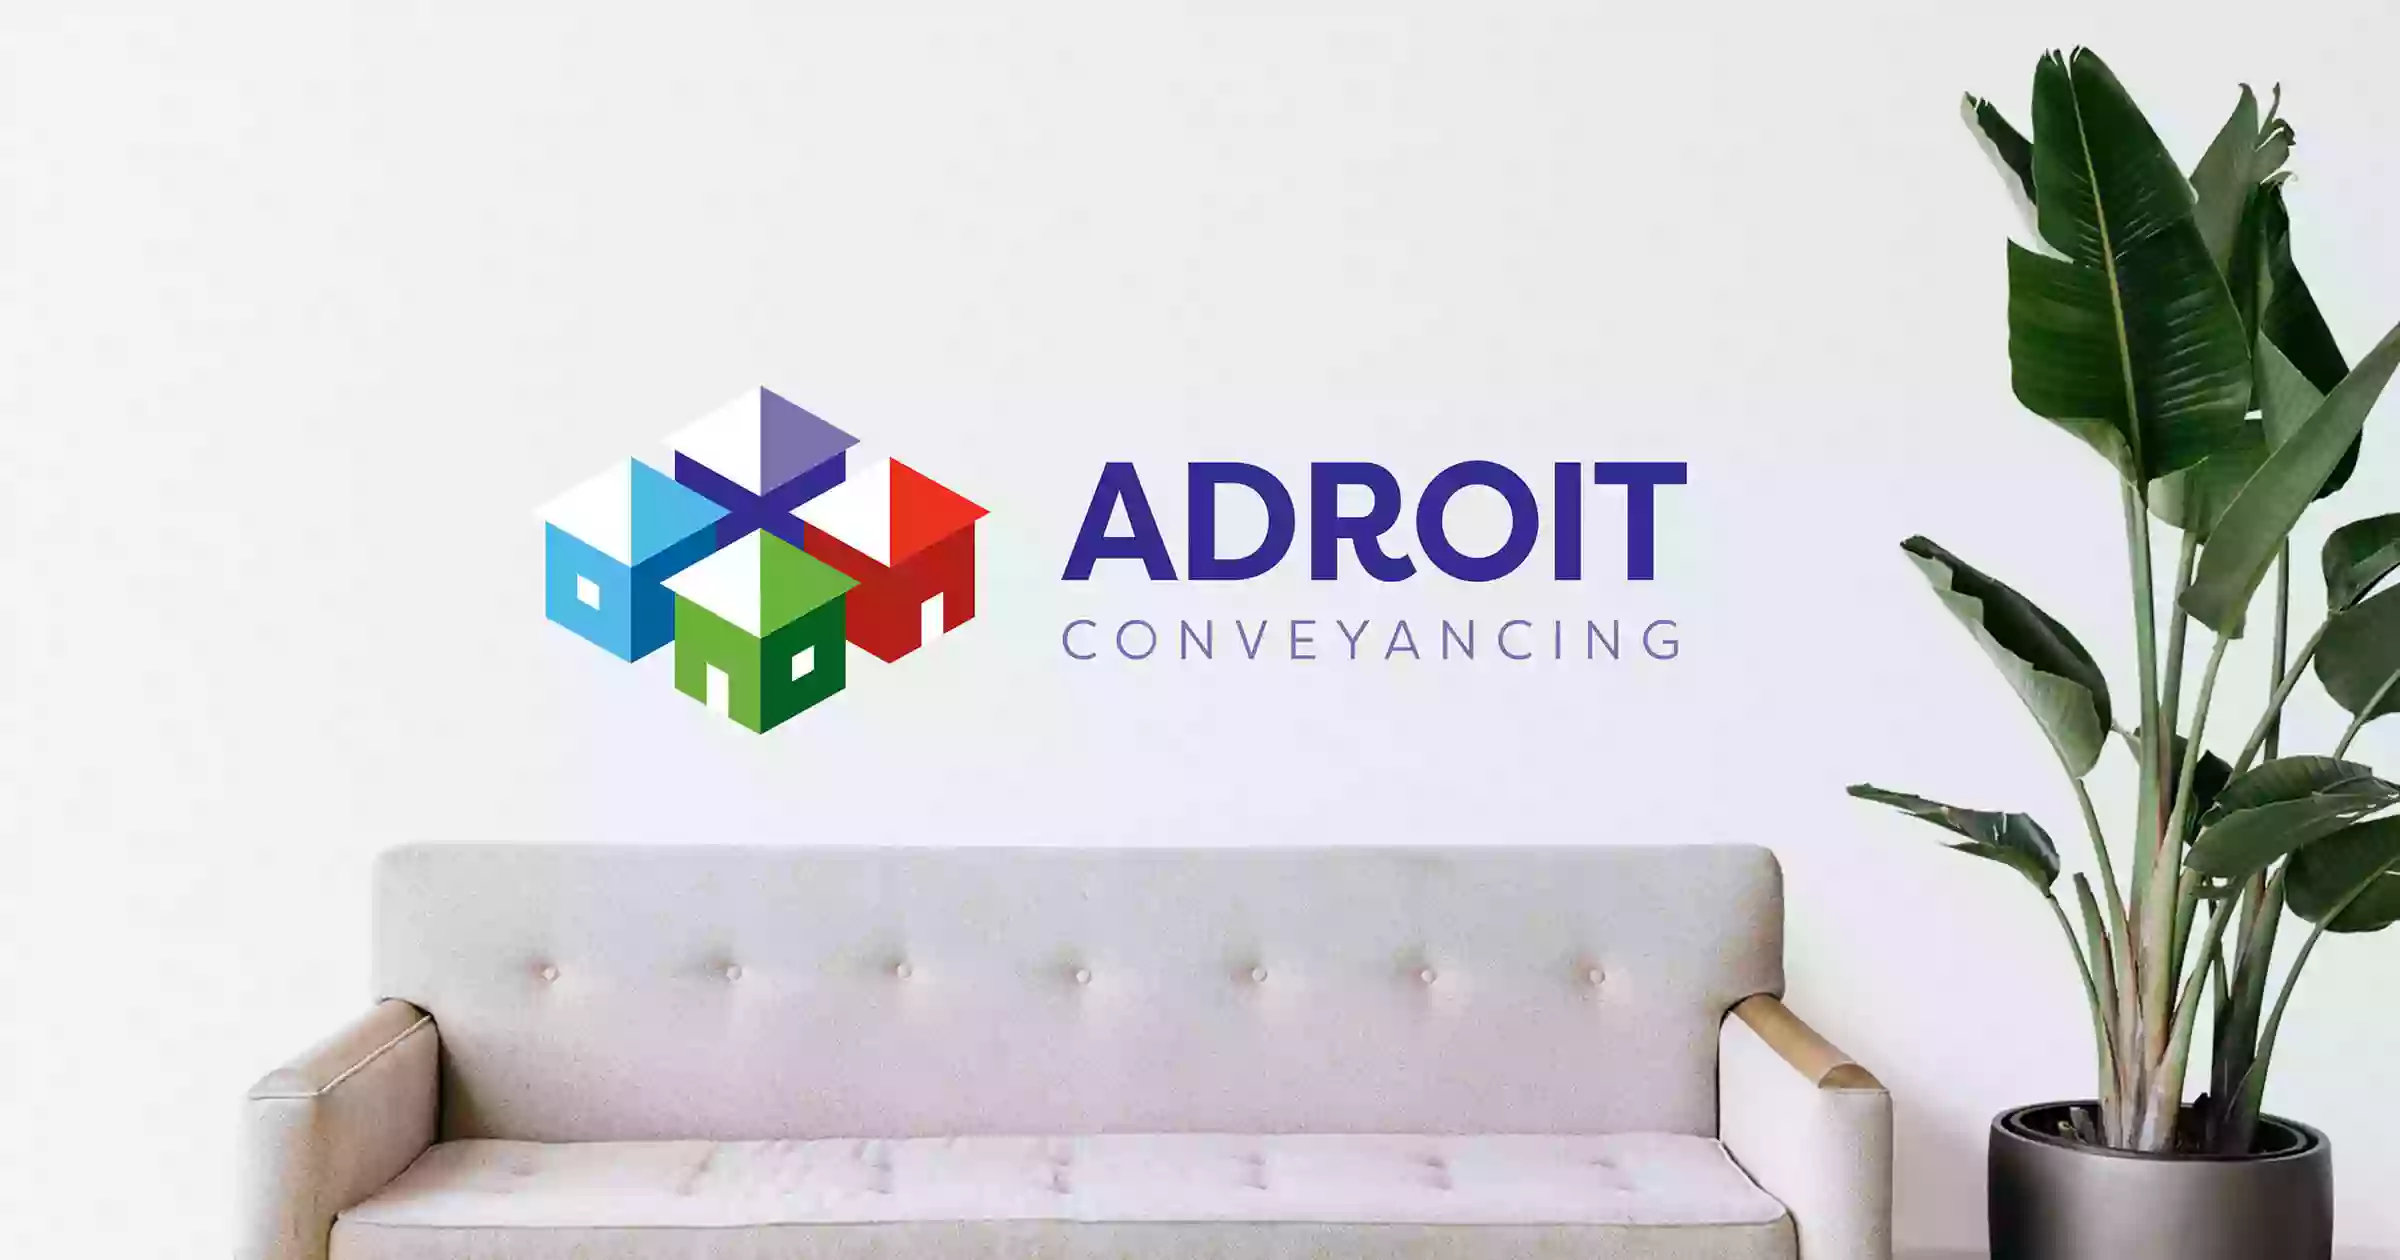 Adroit Conveyancing